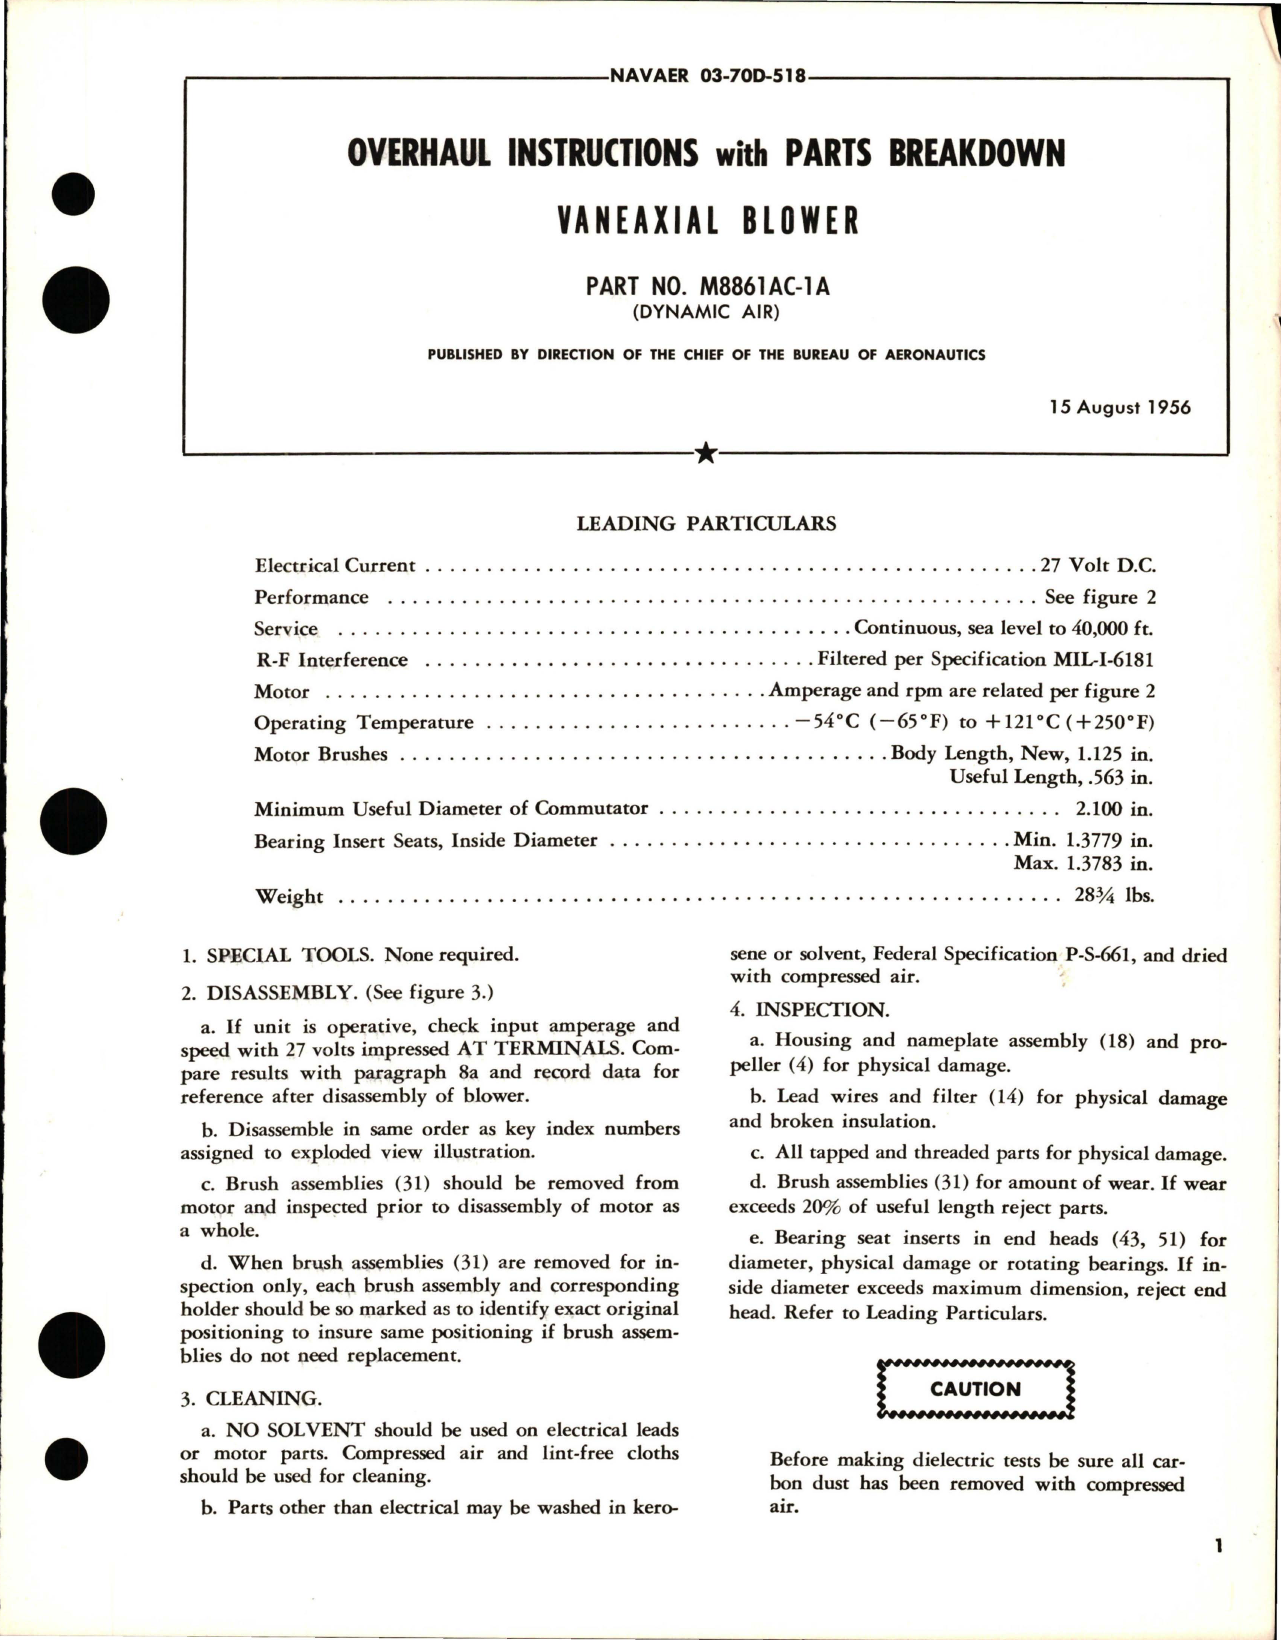 Sample page 1 from AirCorps Library document: Overhaul Instructions with Parts Breakdown for Vaneaxial Blower - Part M8861AC-1A 